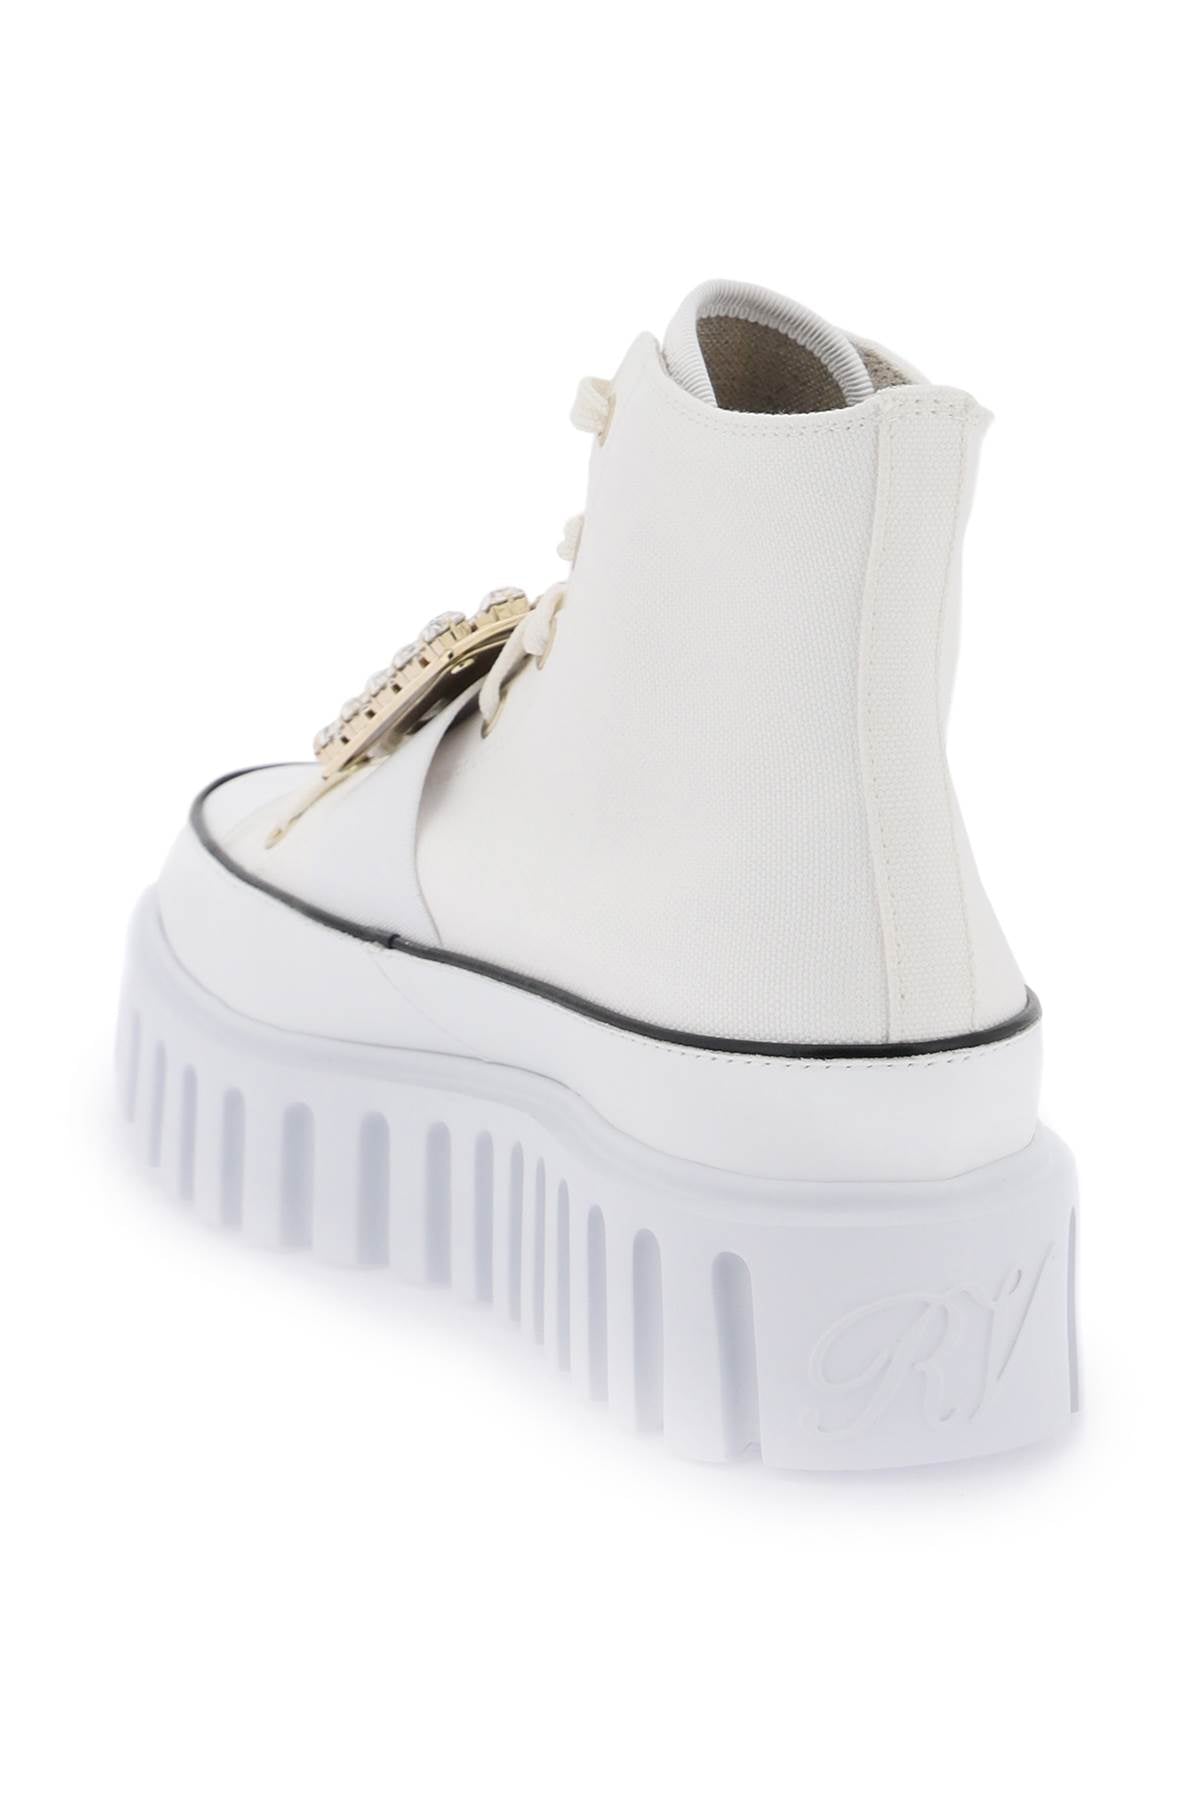 Roger Vivier Roger vivier viv' go-thick canvas high-top sneakers with buckle